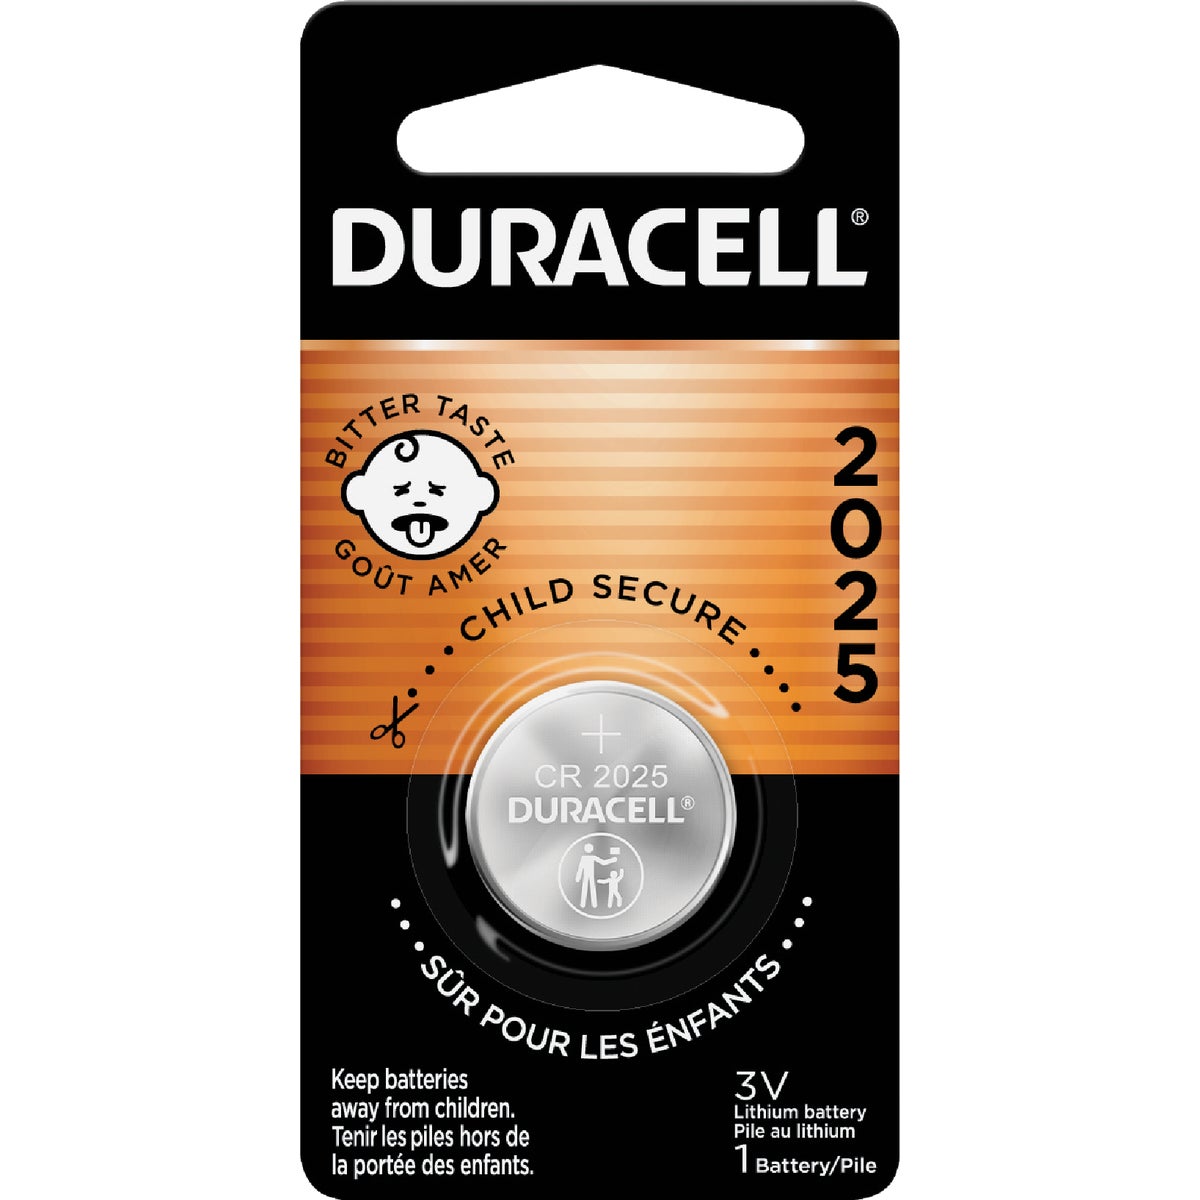 Duracell 2025 Lithium Coin Cell Battery